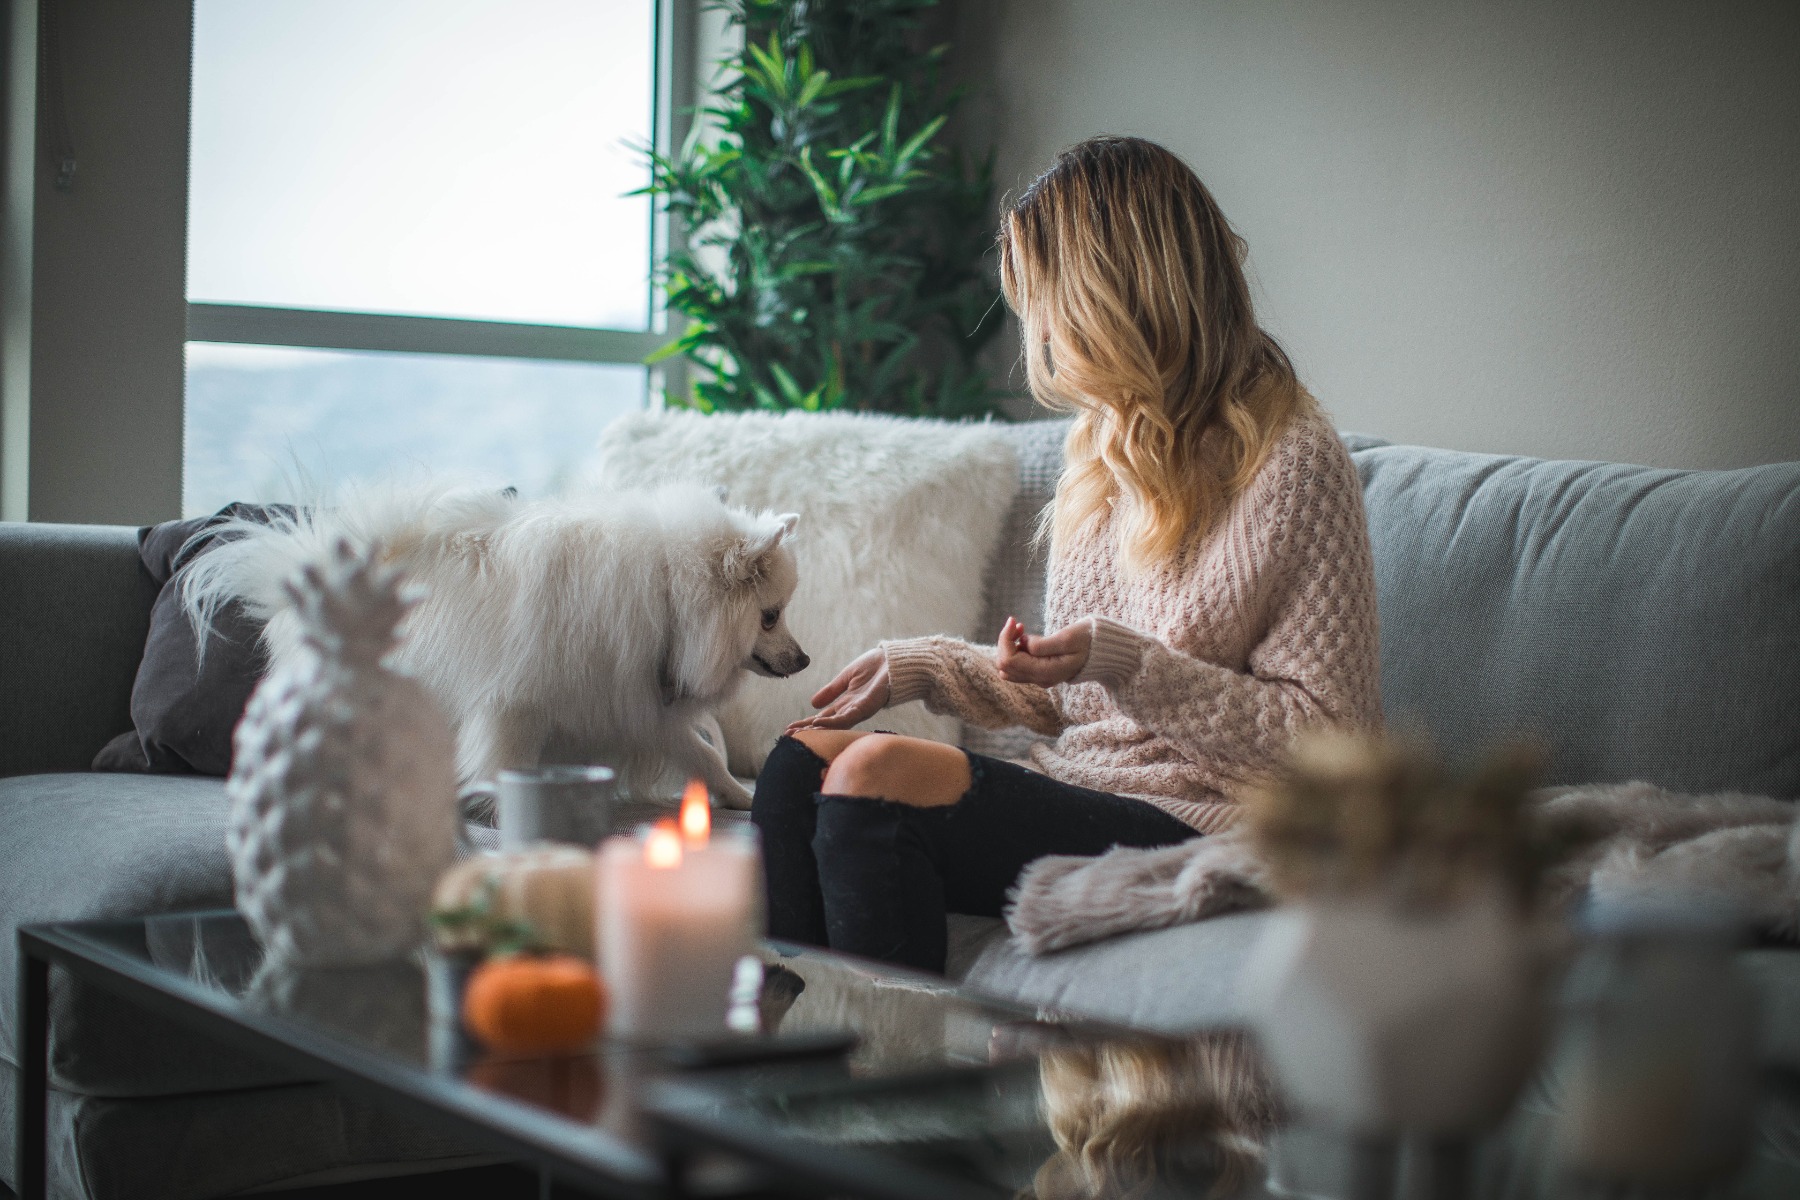 Woman feeding a white dog in a candle-lit living room 